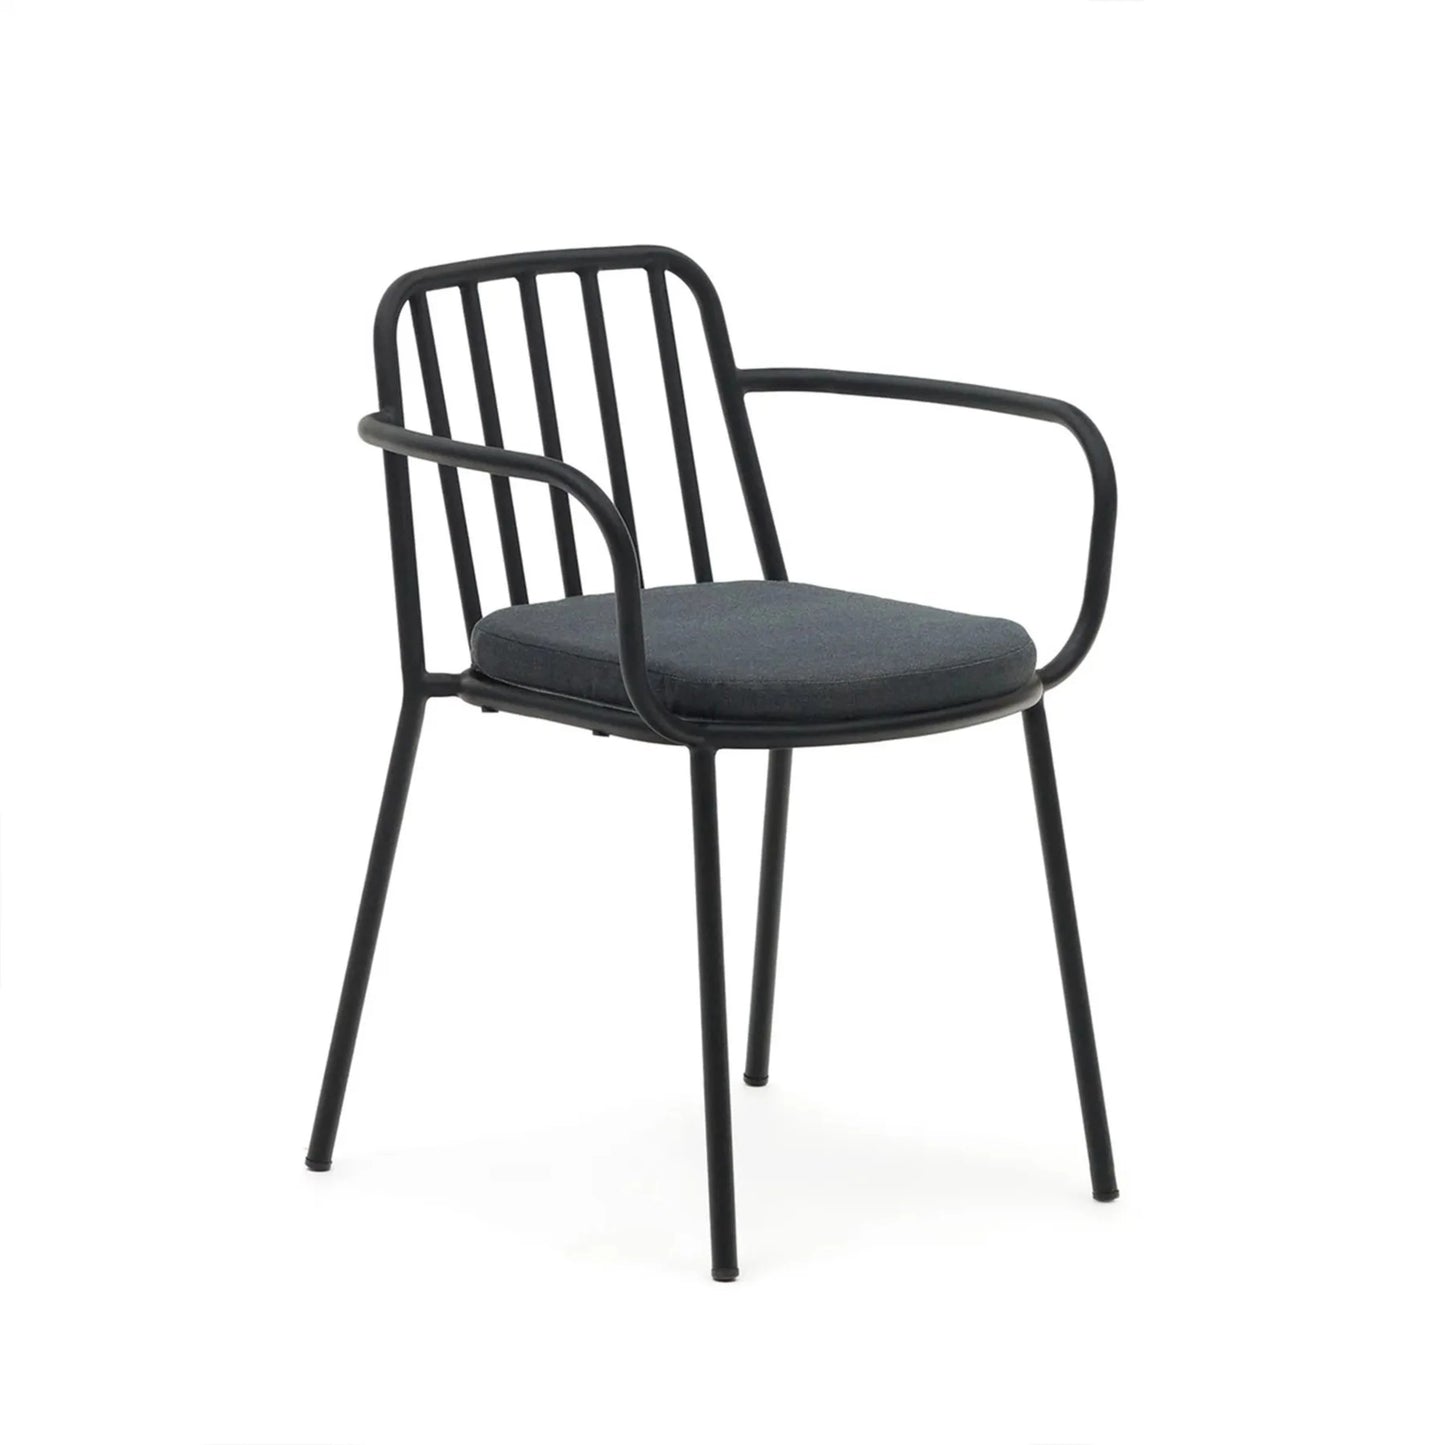 Bramant Outdoor Dining Chair - Black